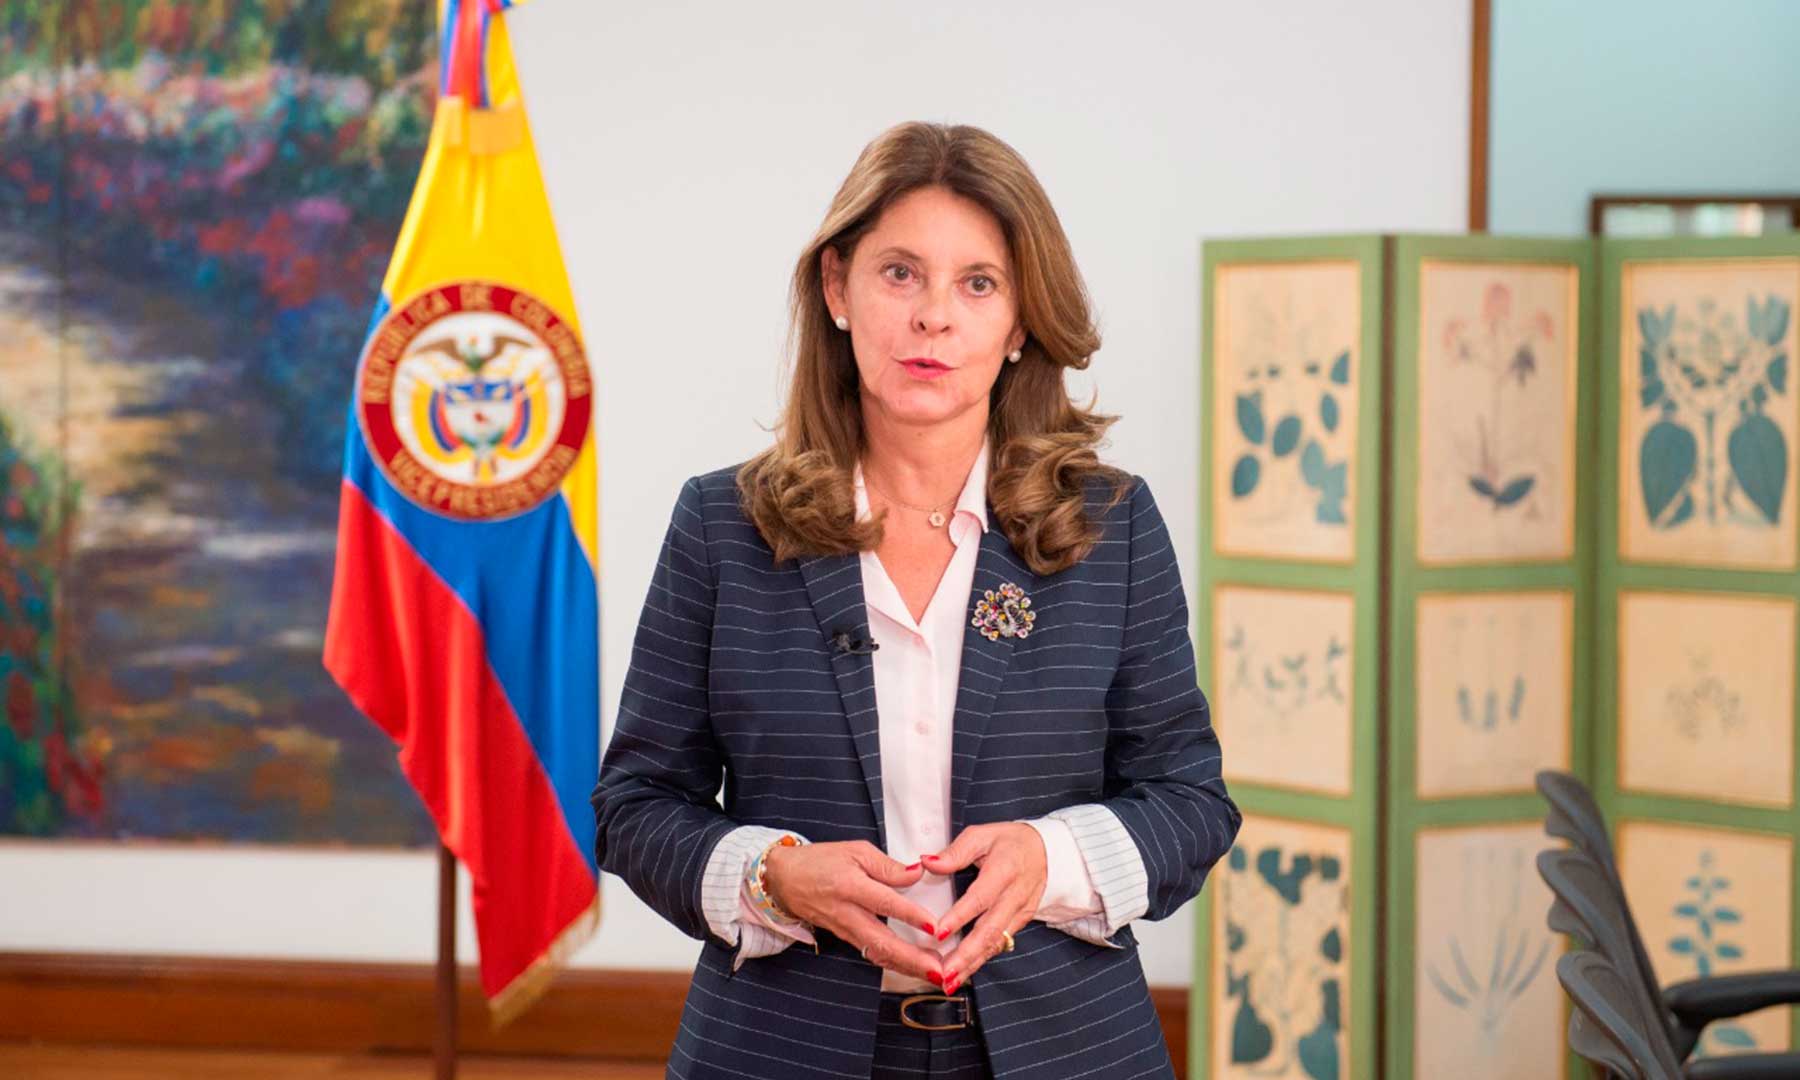 Vice President of Colombia will come to the country this Wednesday to address security issues